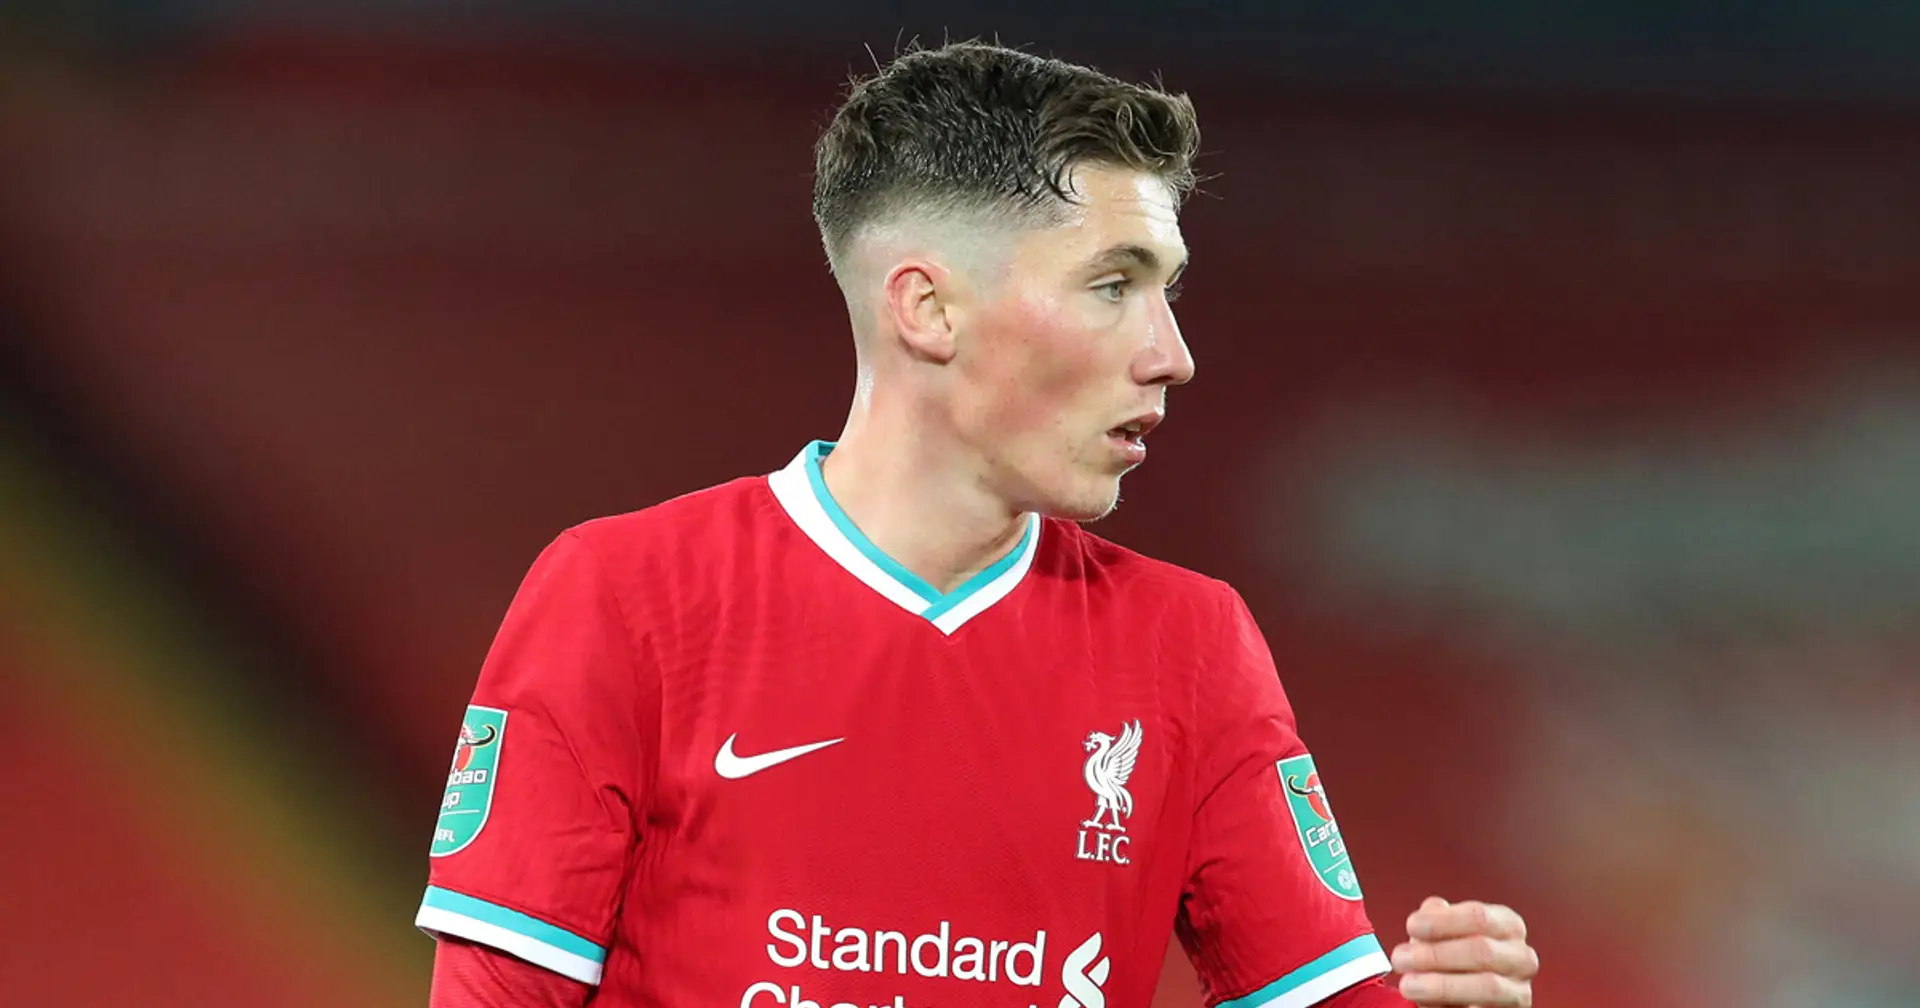 Fulham interested in Harry Wilson move, Liverpool name asking price - The Athletic (reliability: 5 stars)